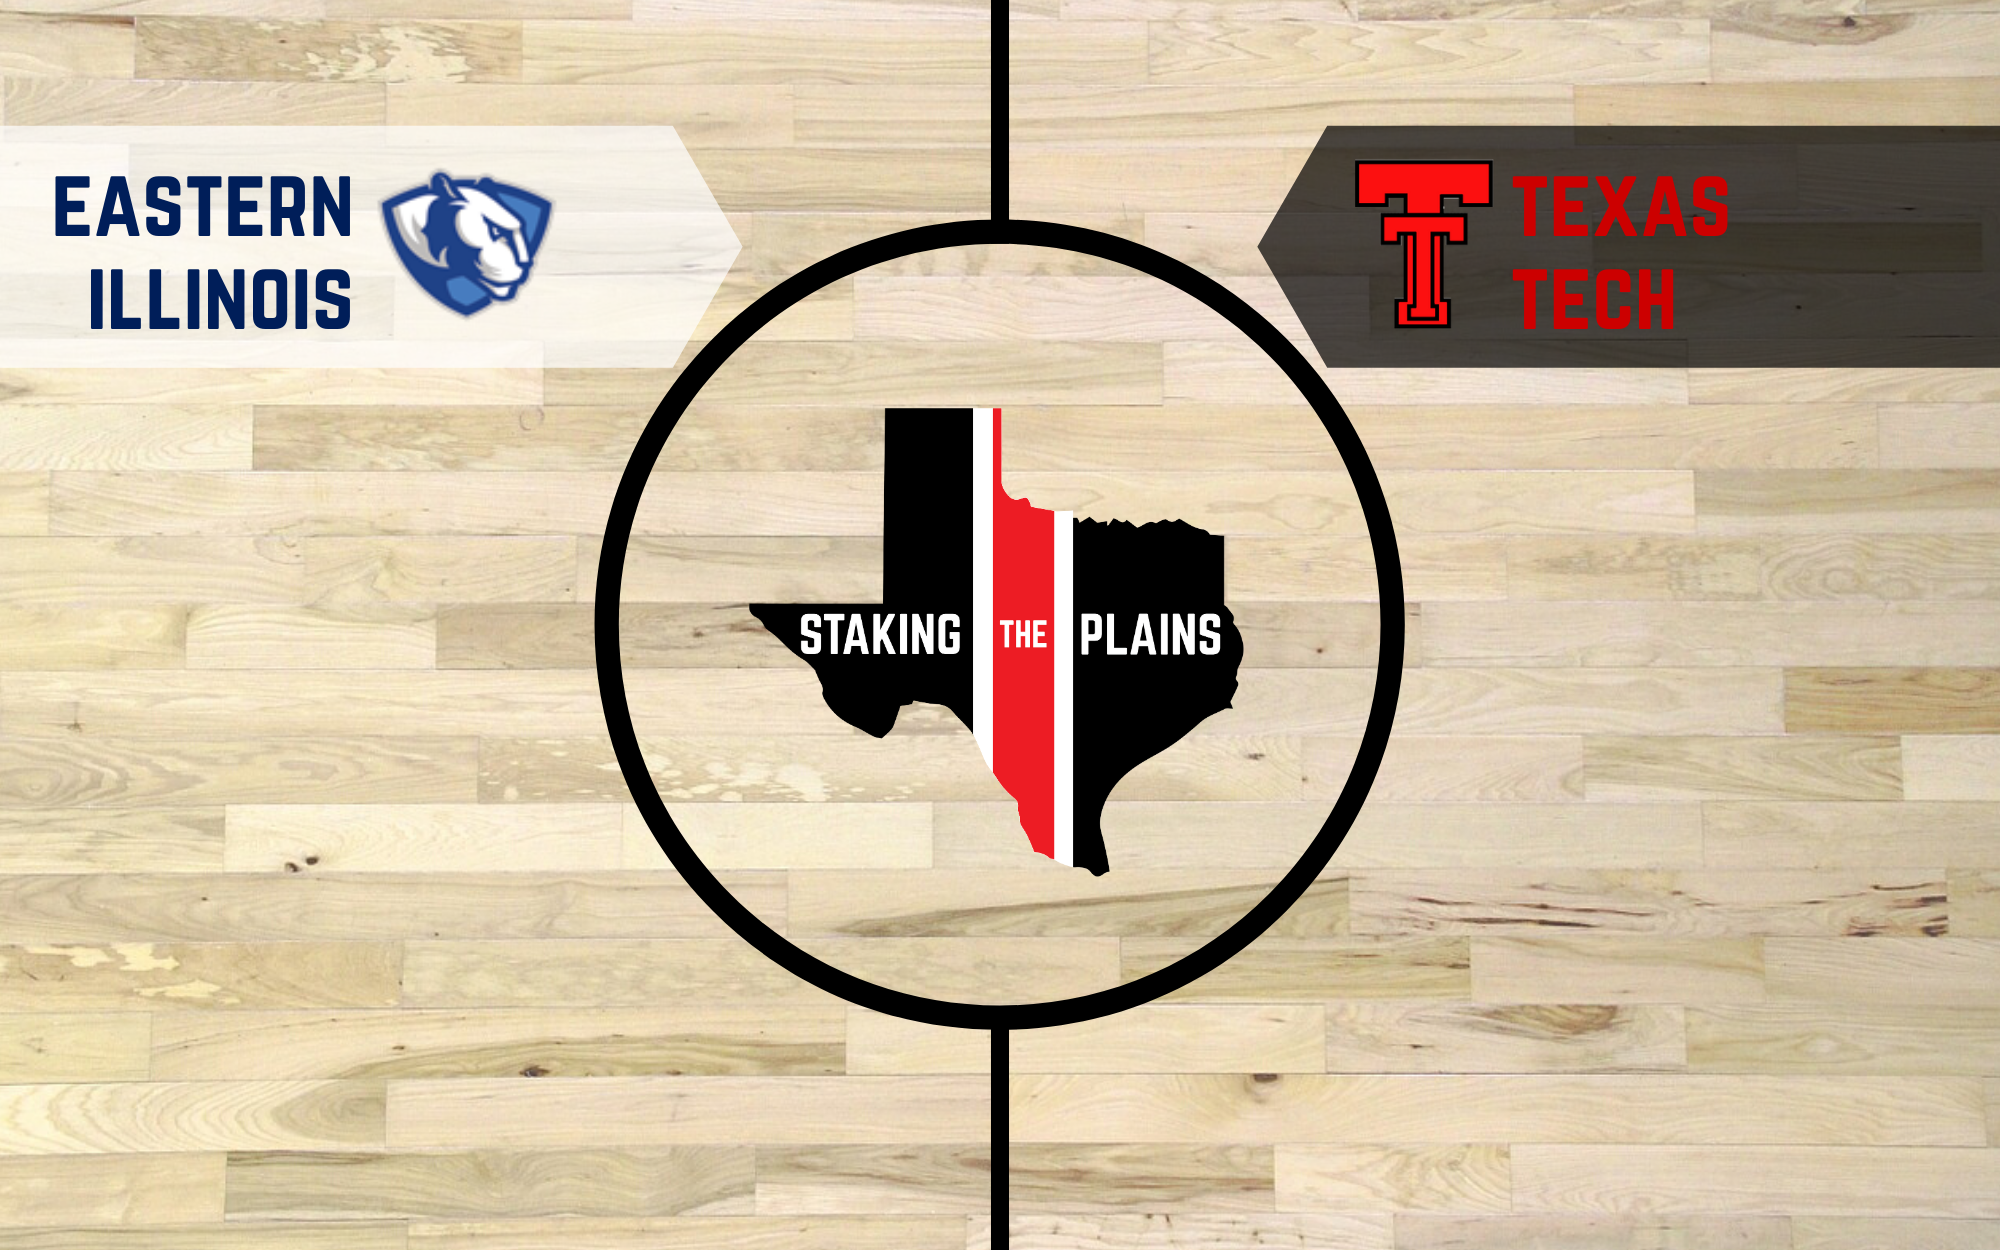 Preview & GDT: Eastern Illinois vs. Texas Tech